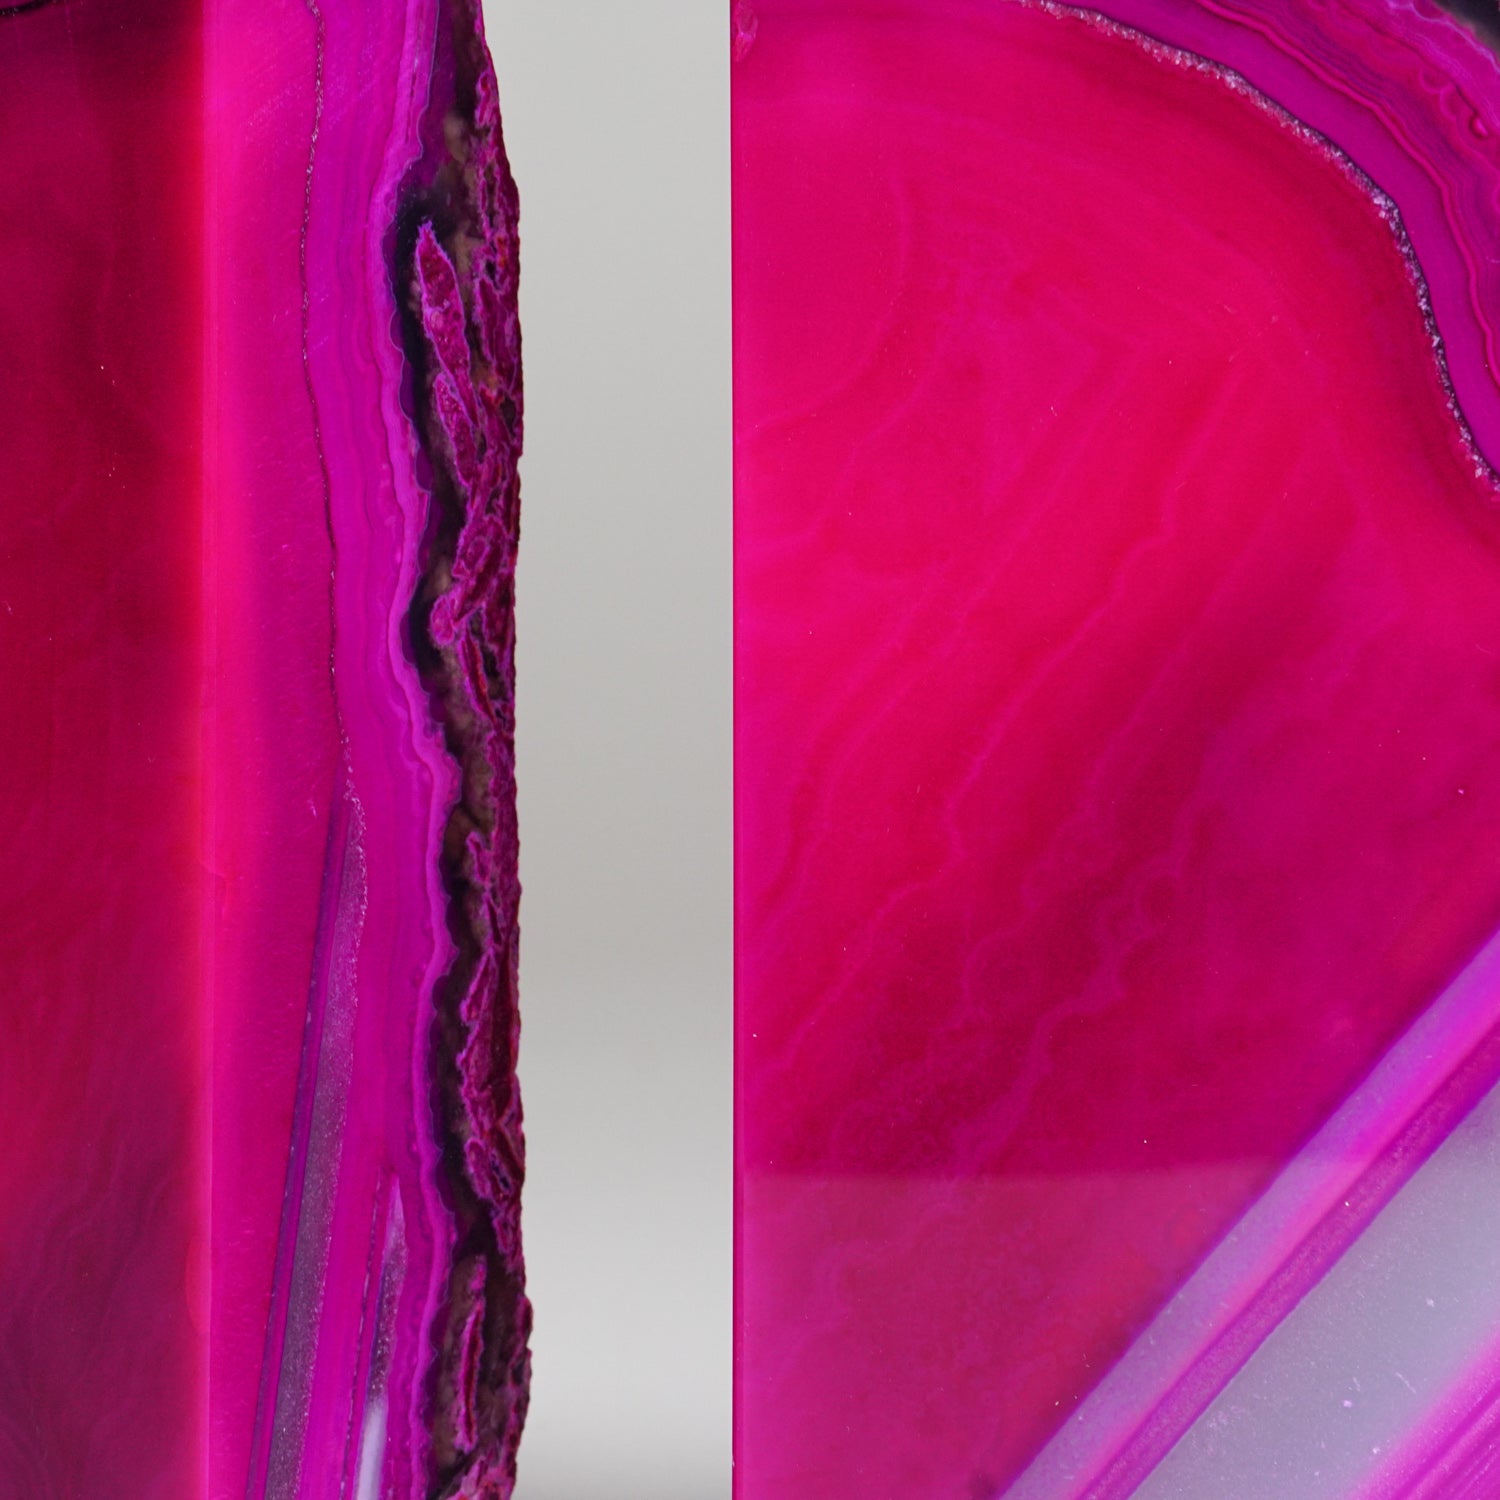 Genuine Pink Banded Agate Bookends from Brazil (6.3 lbs)